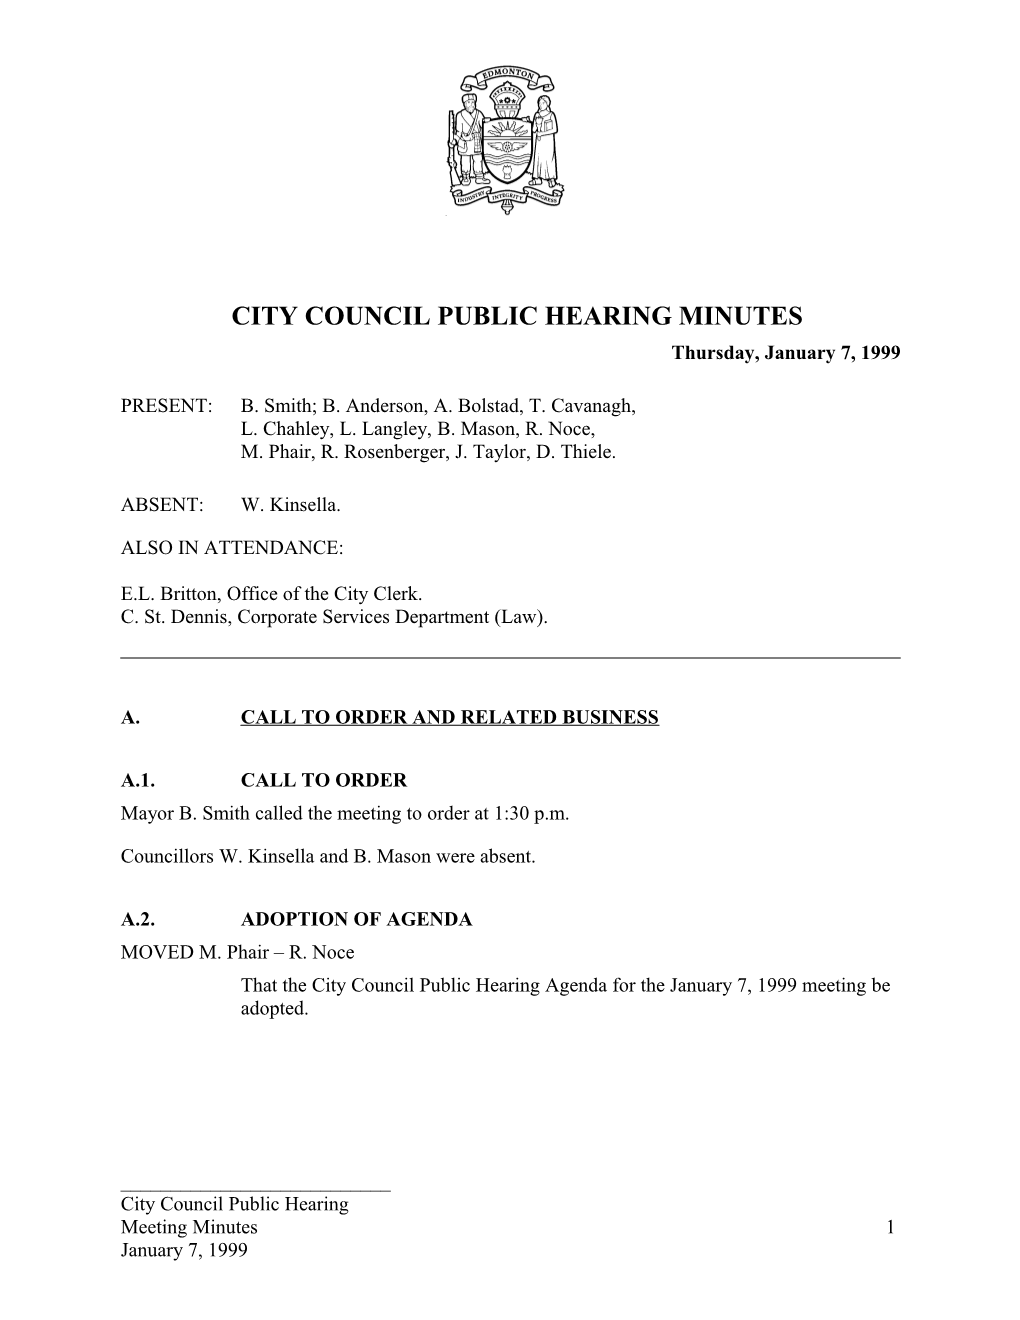 Minutes for City Council January 7, 1999 Meeting